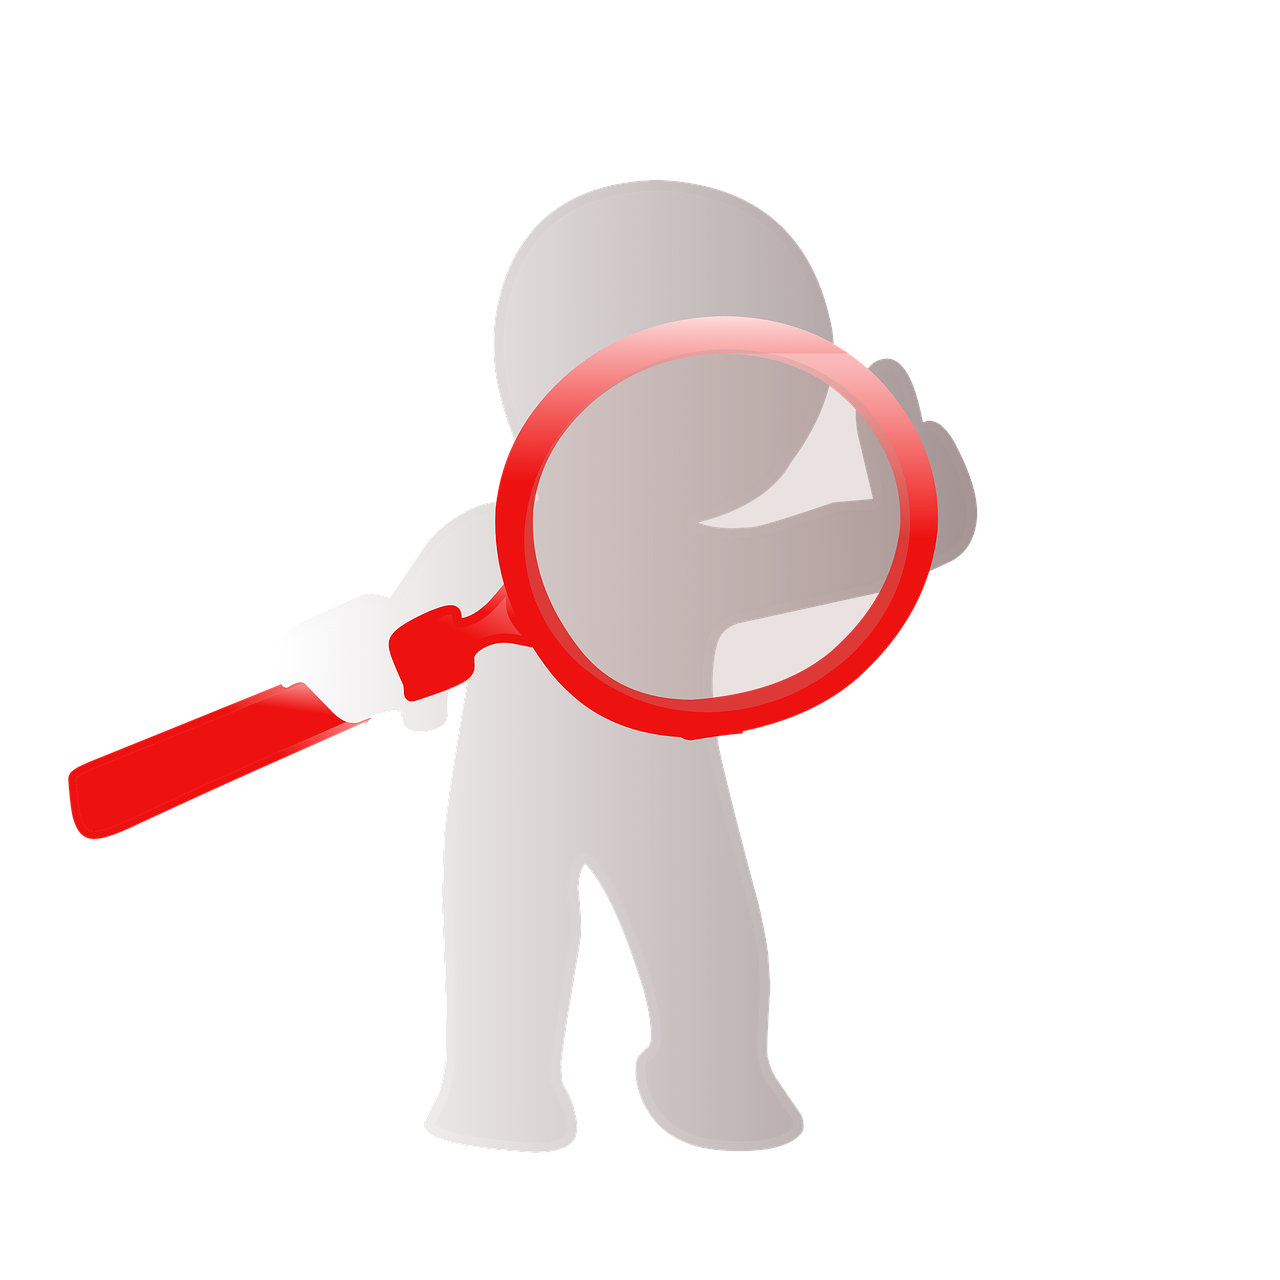 a person holding a magnifying glass with a red handle, a raytraced image, by Taiyō Matsumoto, pixabay, conceptual art, spoon slim figure, white outline, nighttime, 1 figure only